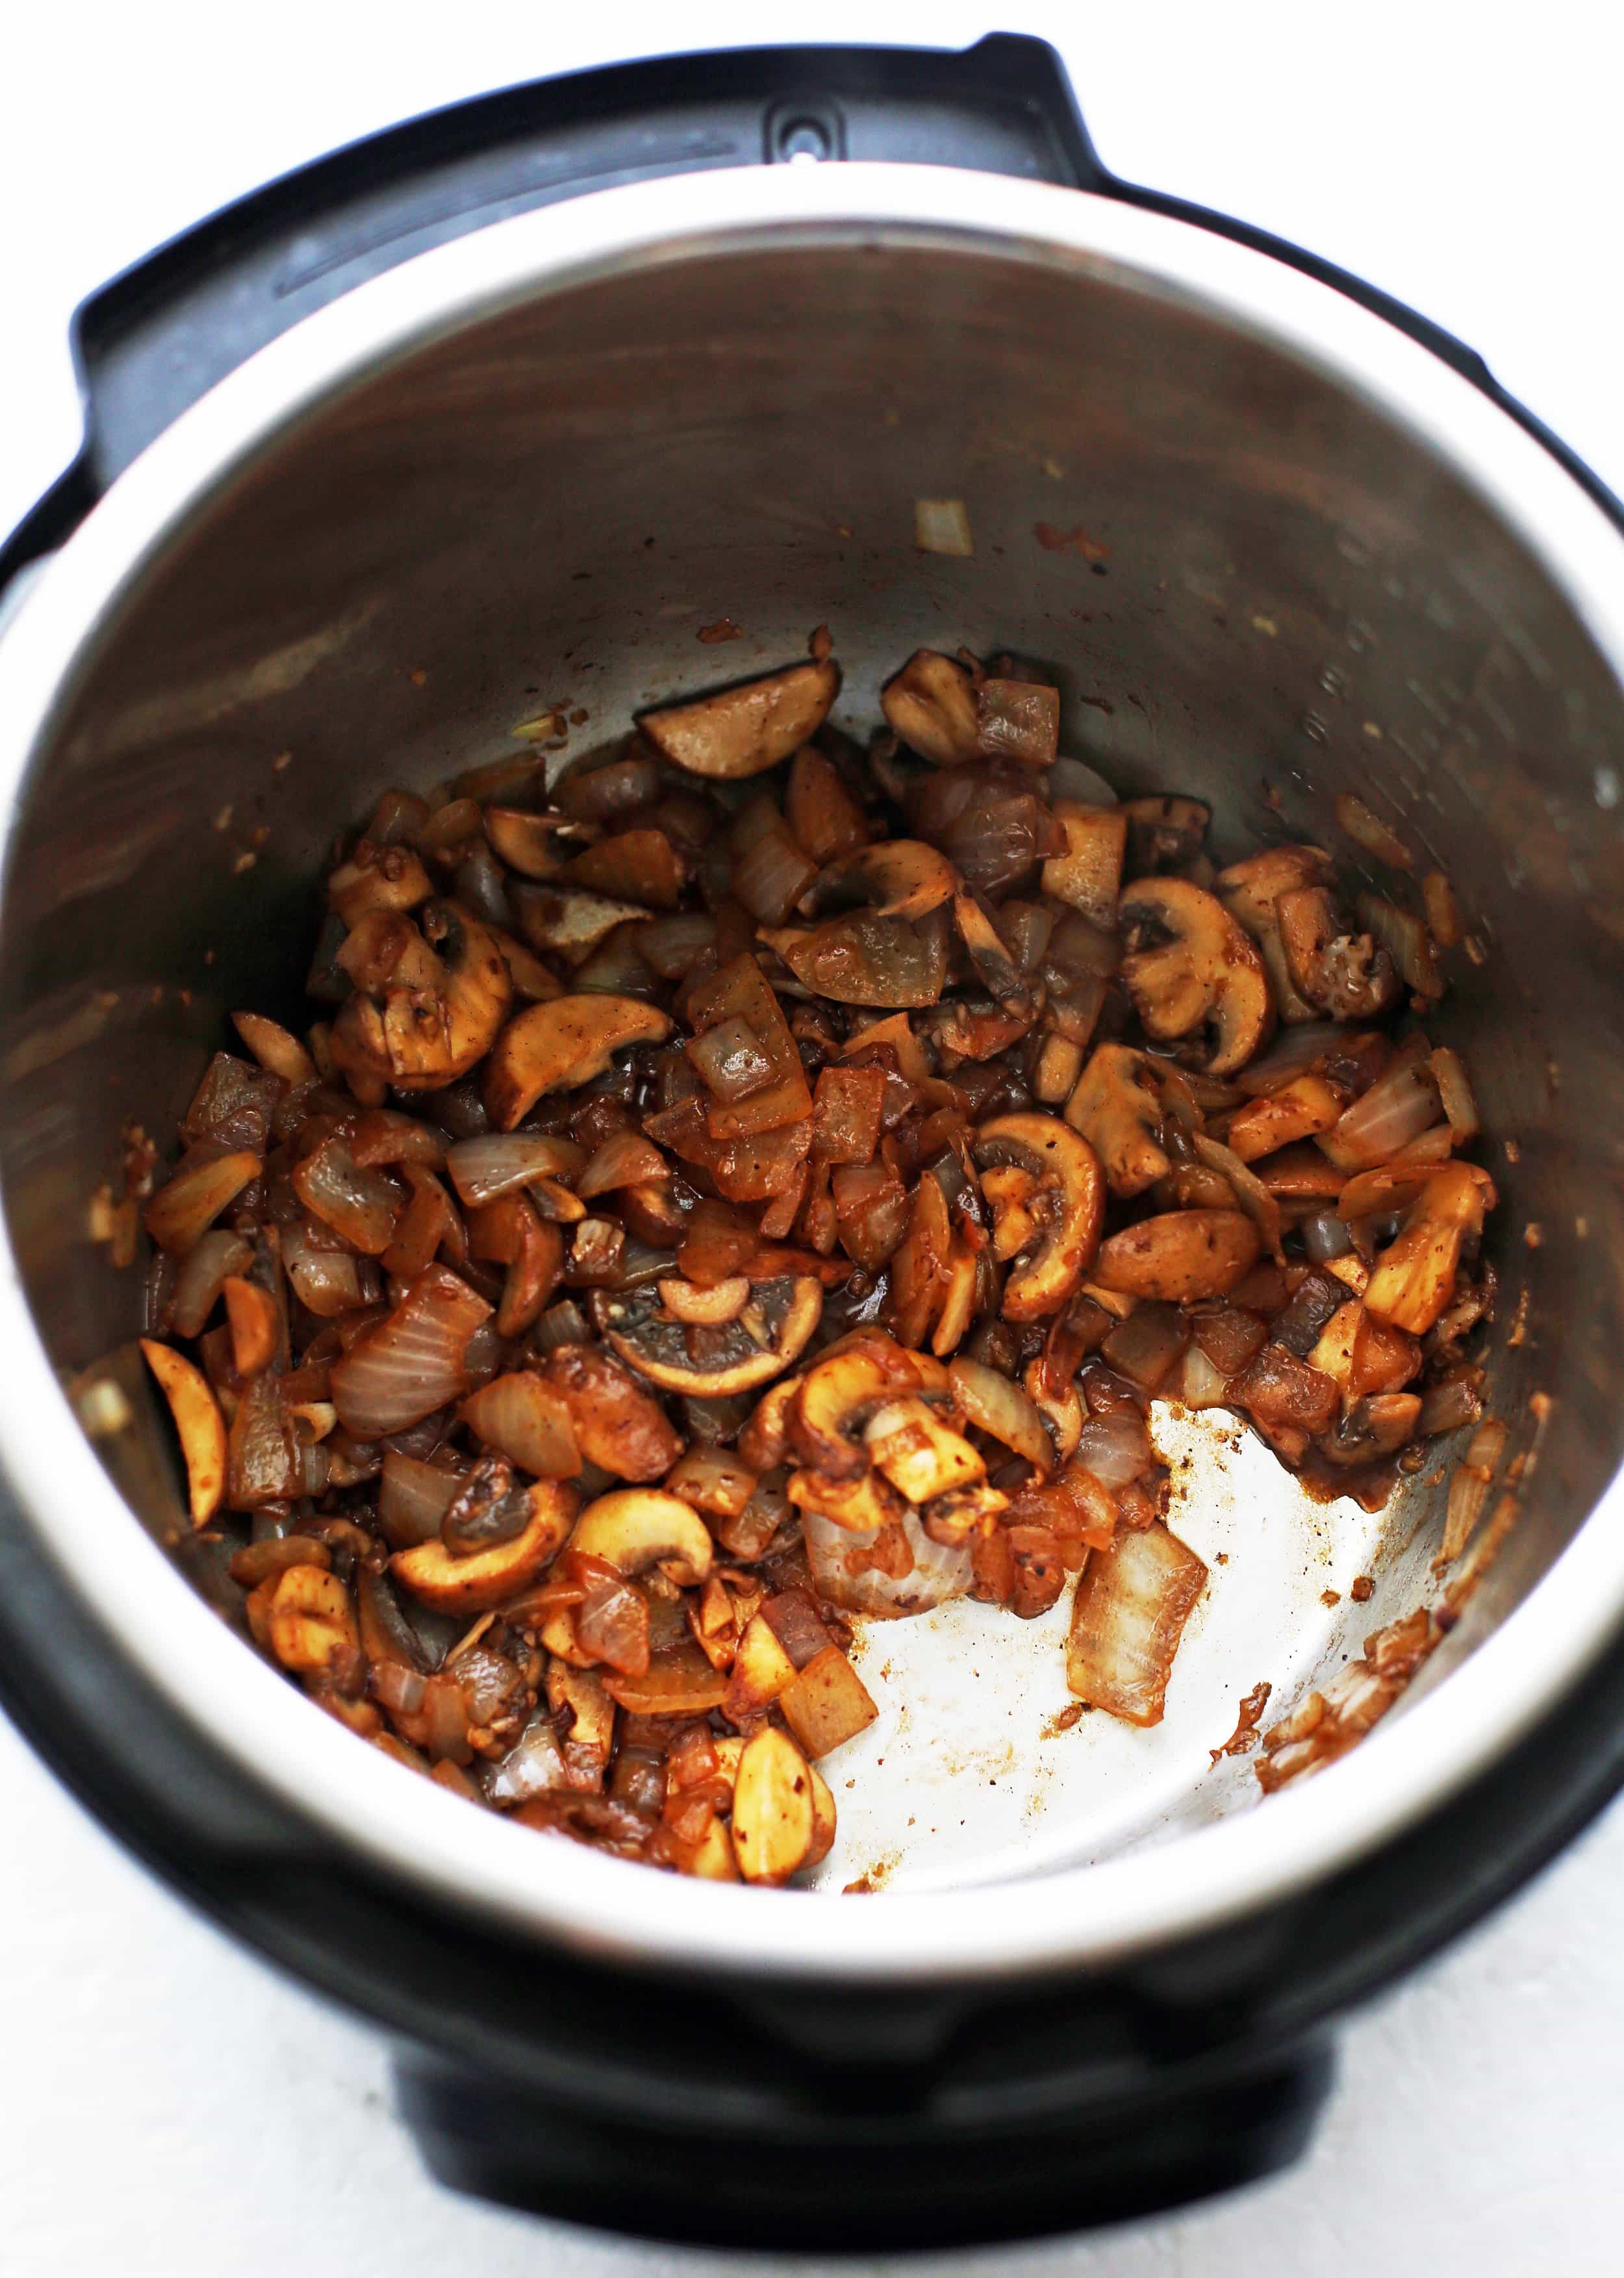 Sauteed onions, garlic, and mushrooms in the Instant Pot.